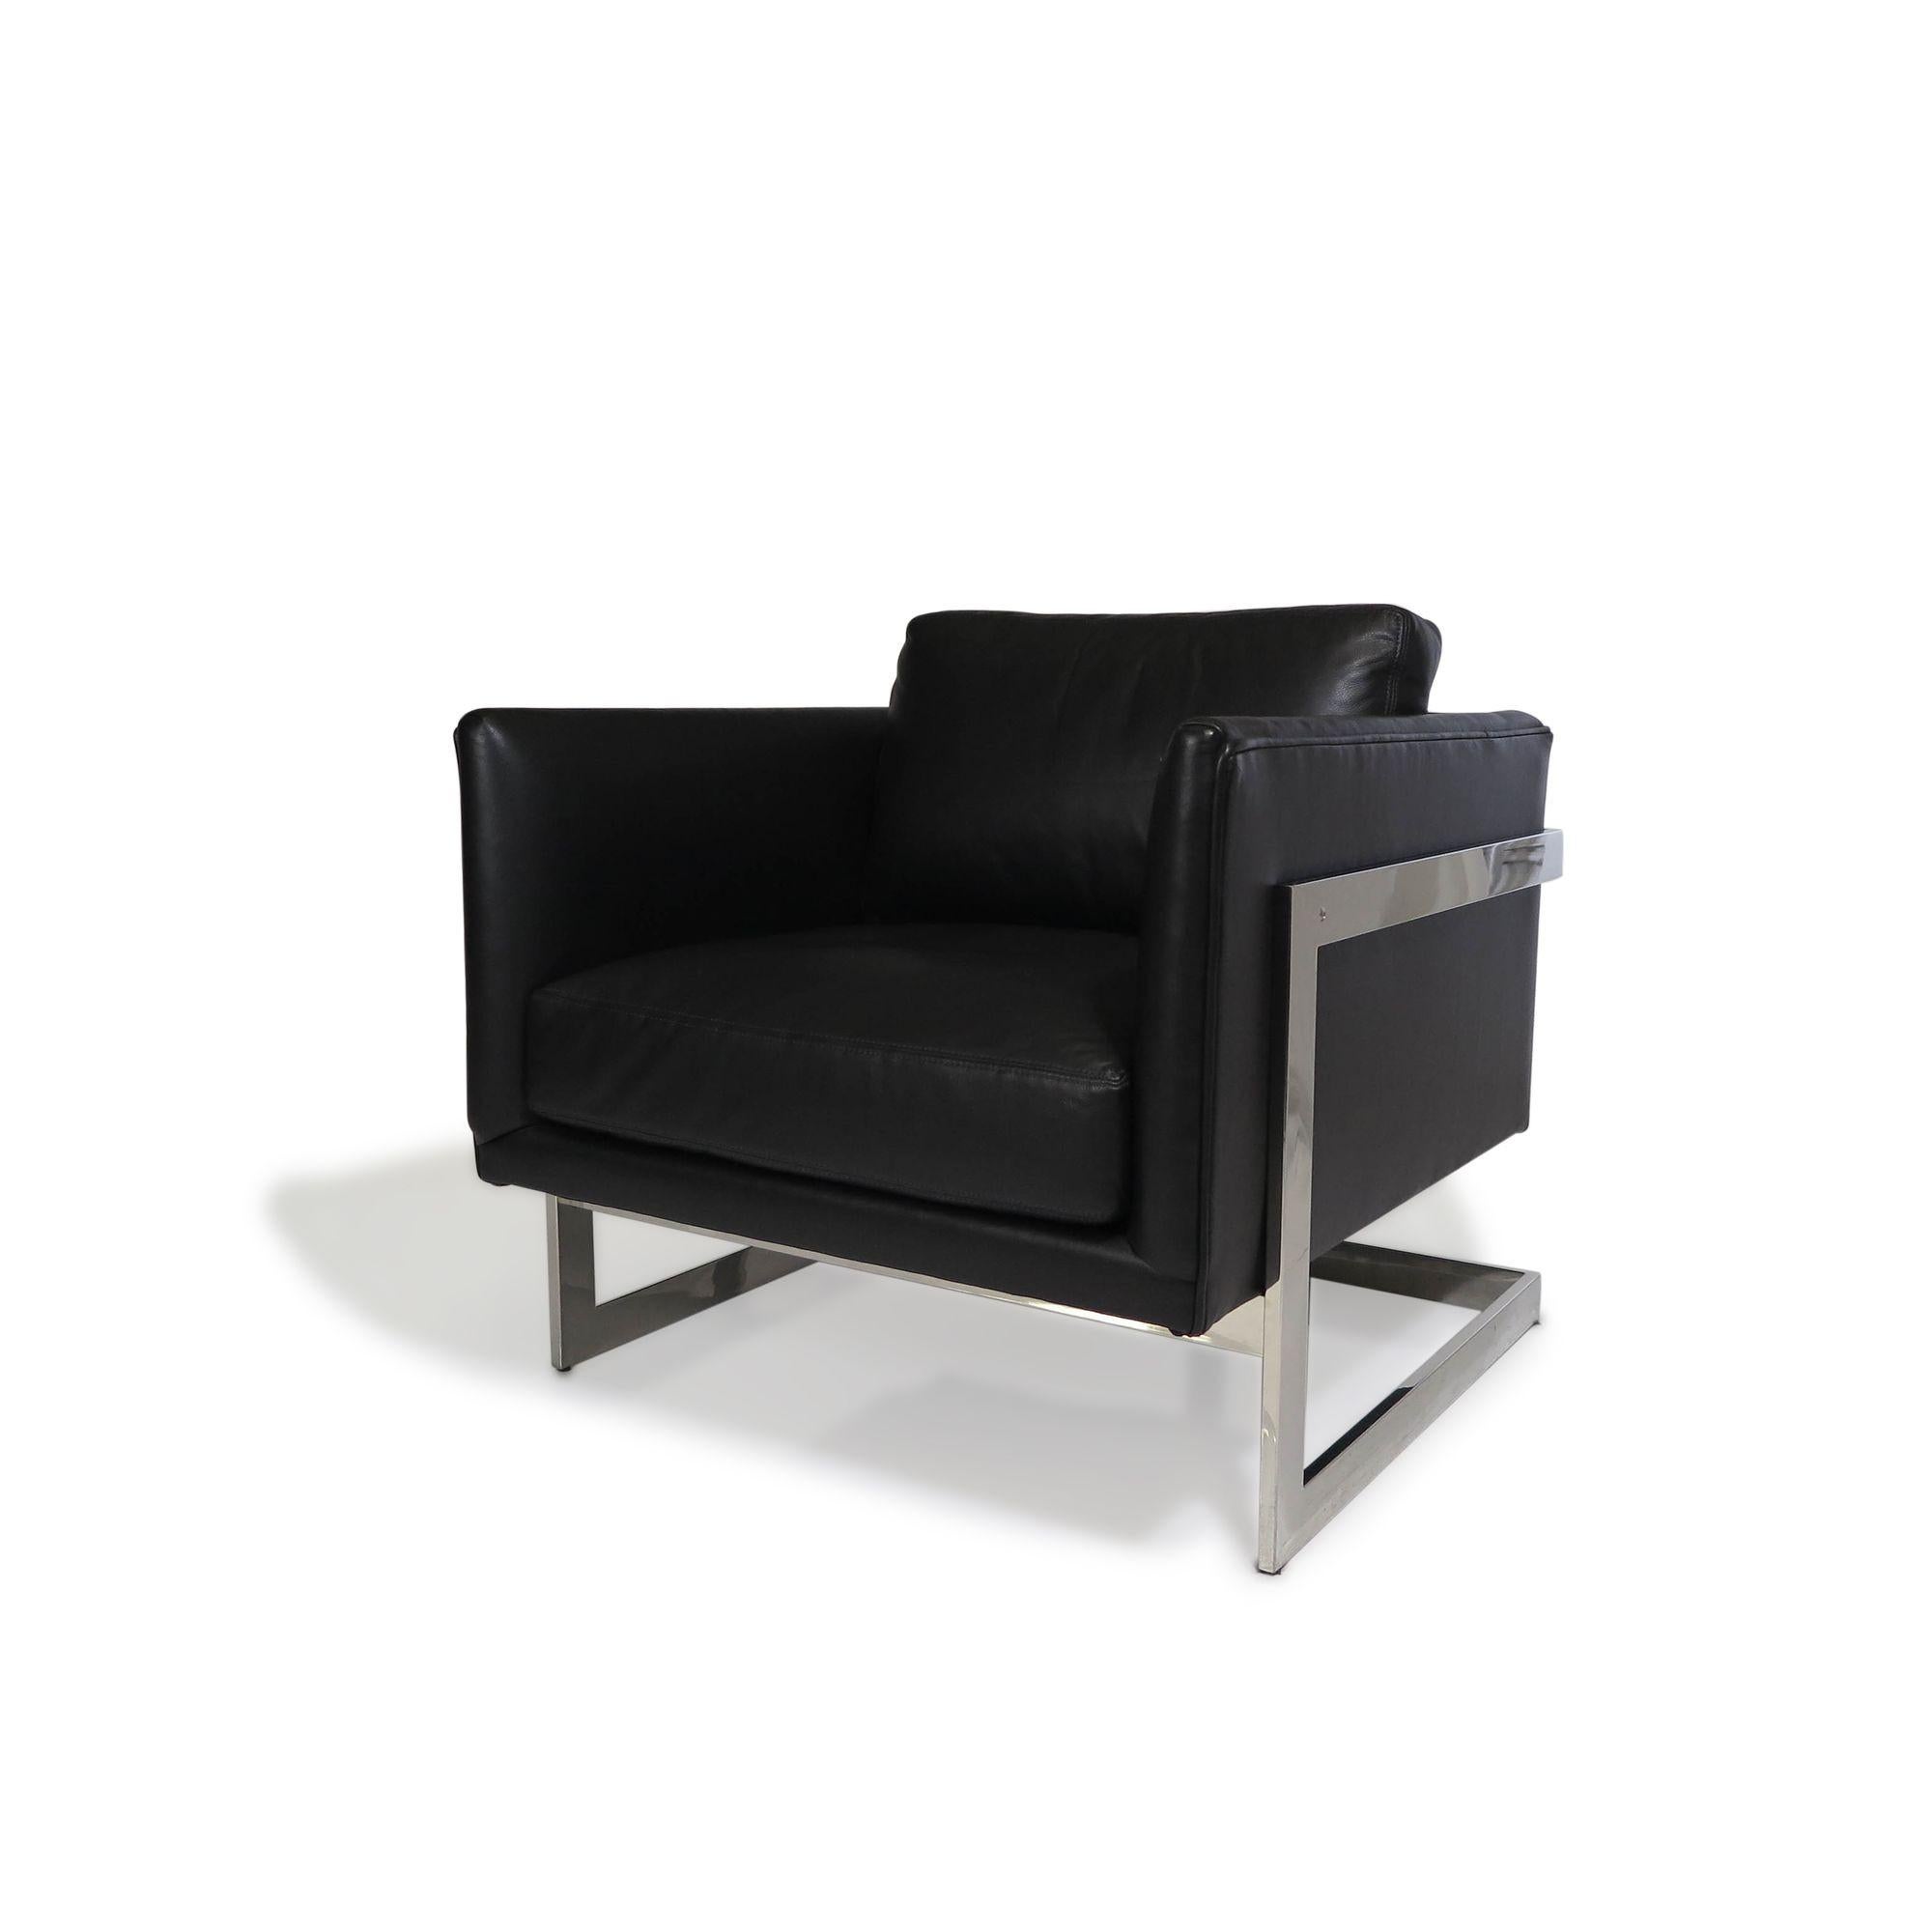 Mid-Century Modern Milo Baughman Black Leather and Chrome Lounge Chair for Thayer Coggin For Sale